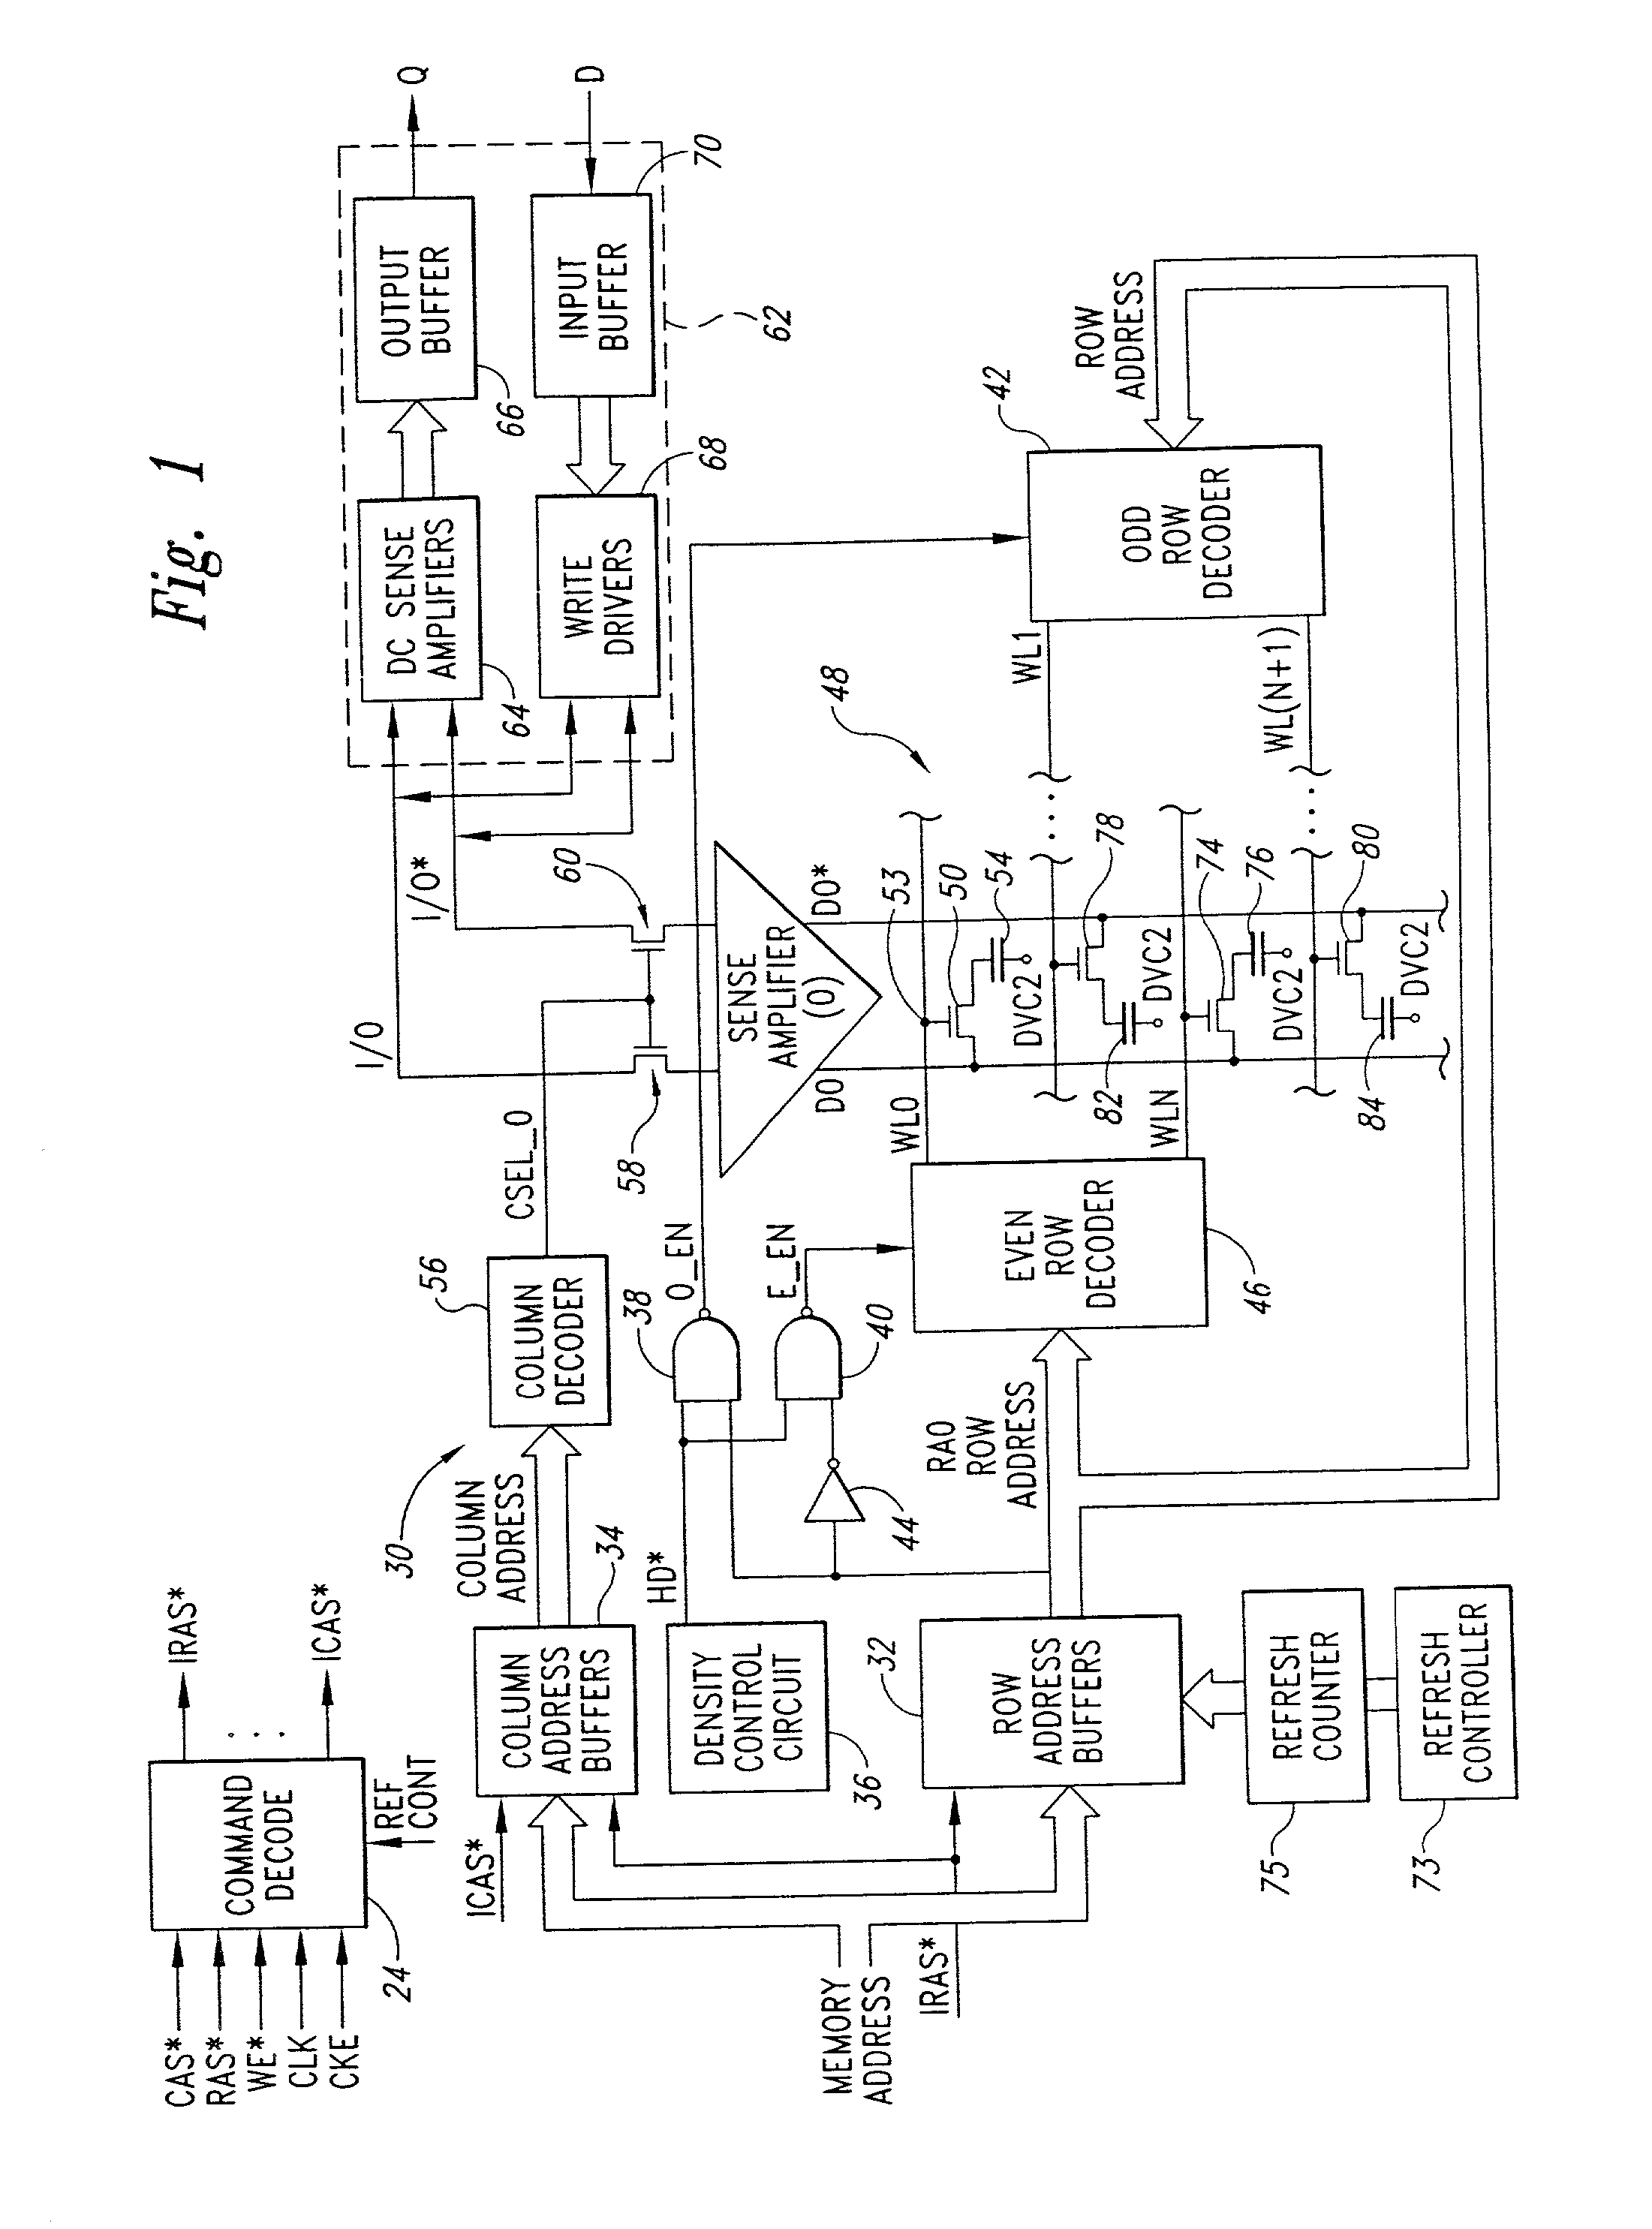 Refresh controller and address remapping circuit and method for dual mode full/reduced density DRAMs